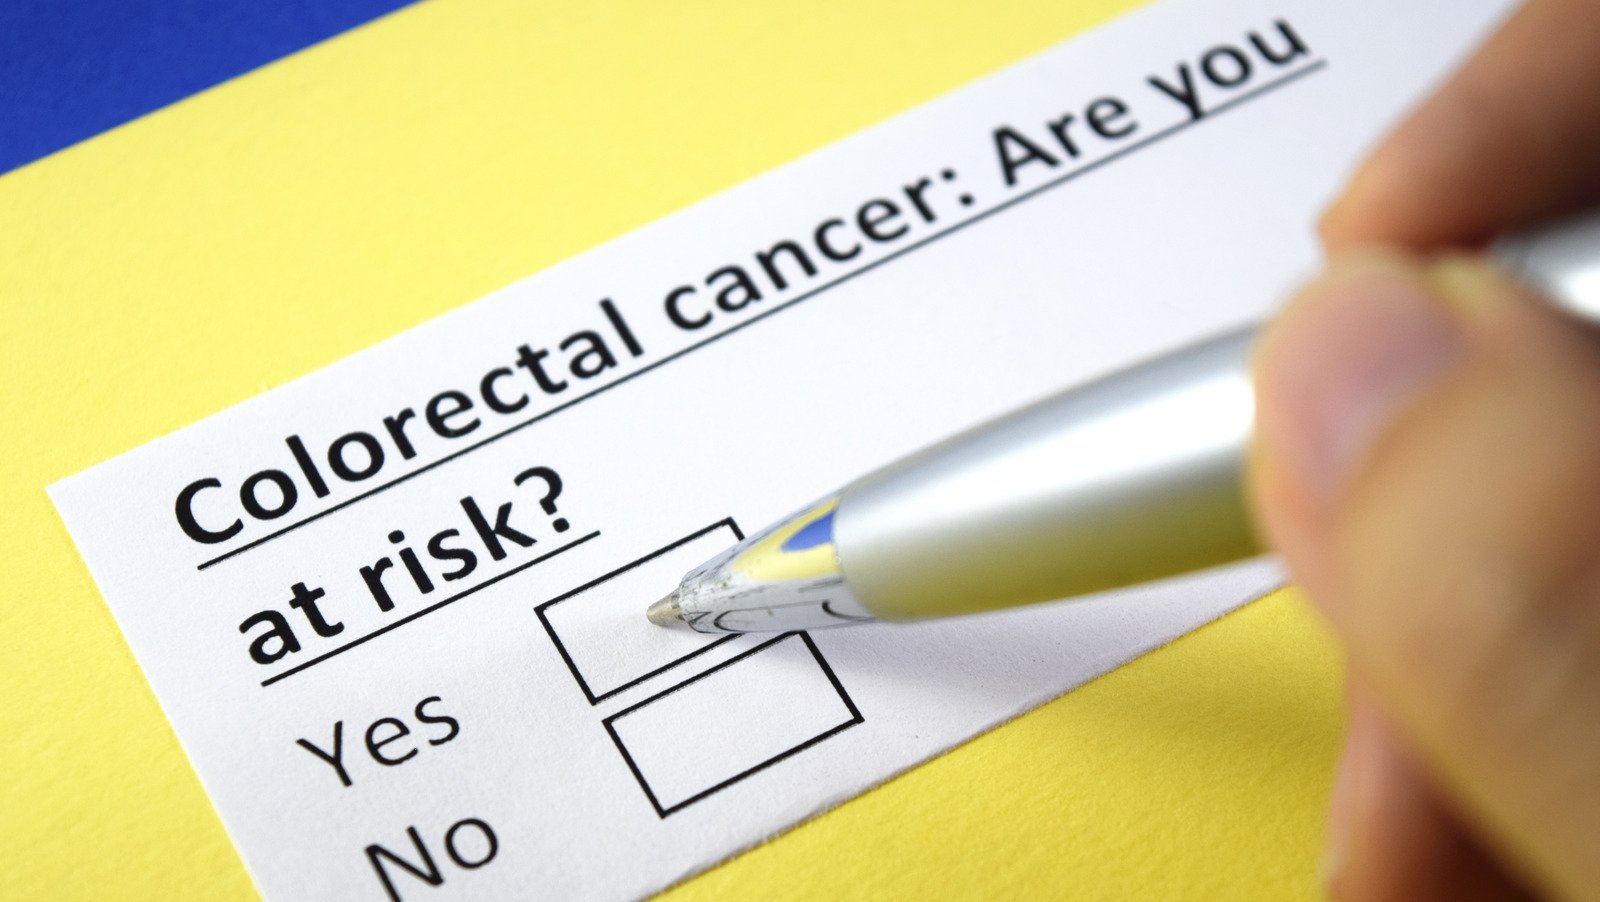 What You Can Do To Decrease Your Risk Of Colorectal Cancer